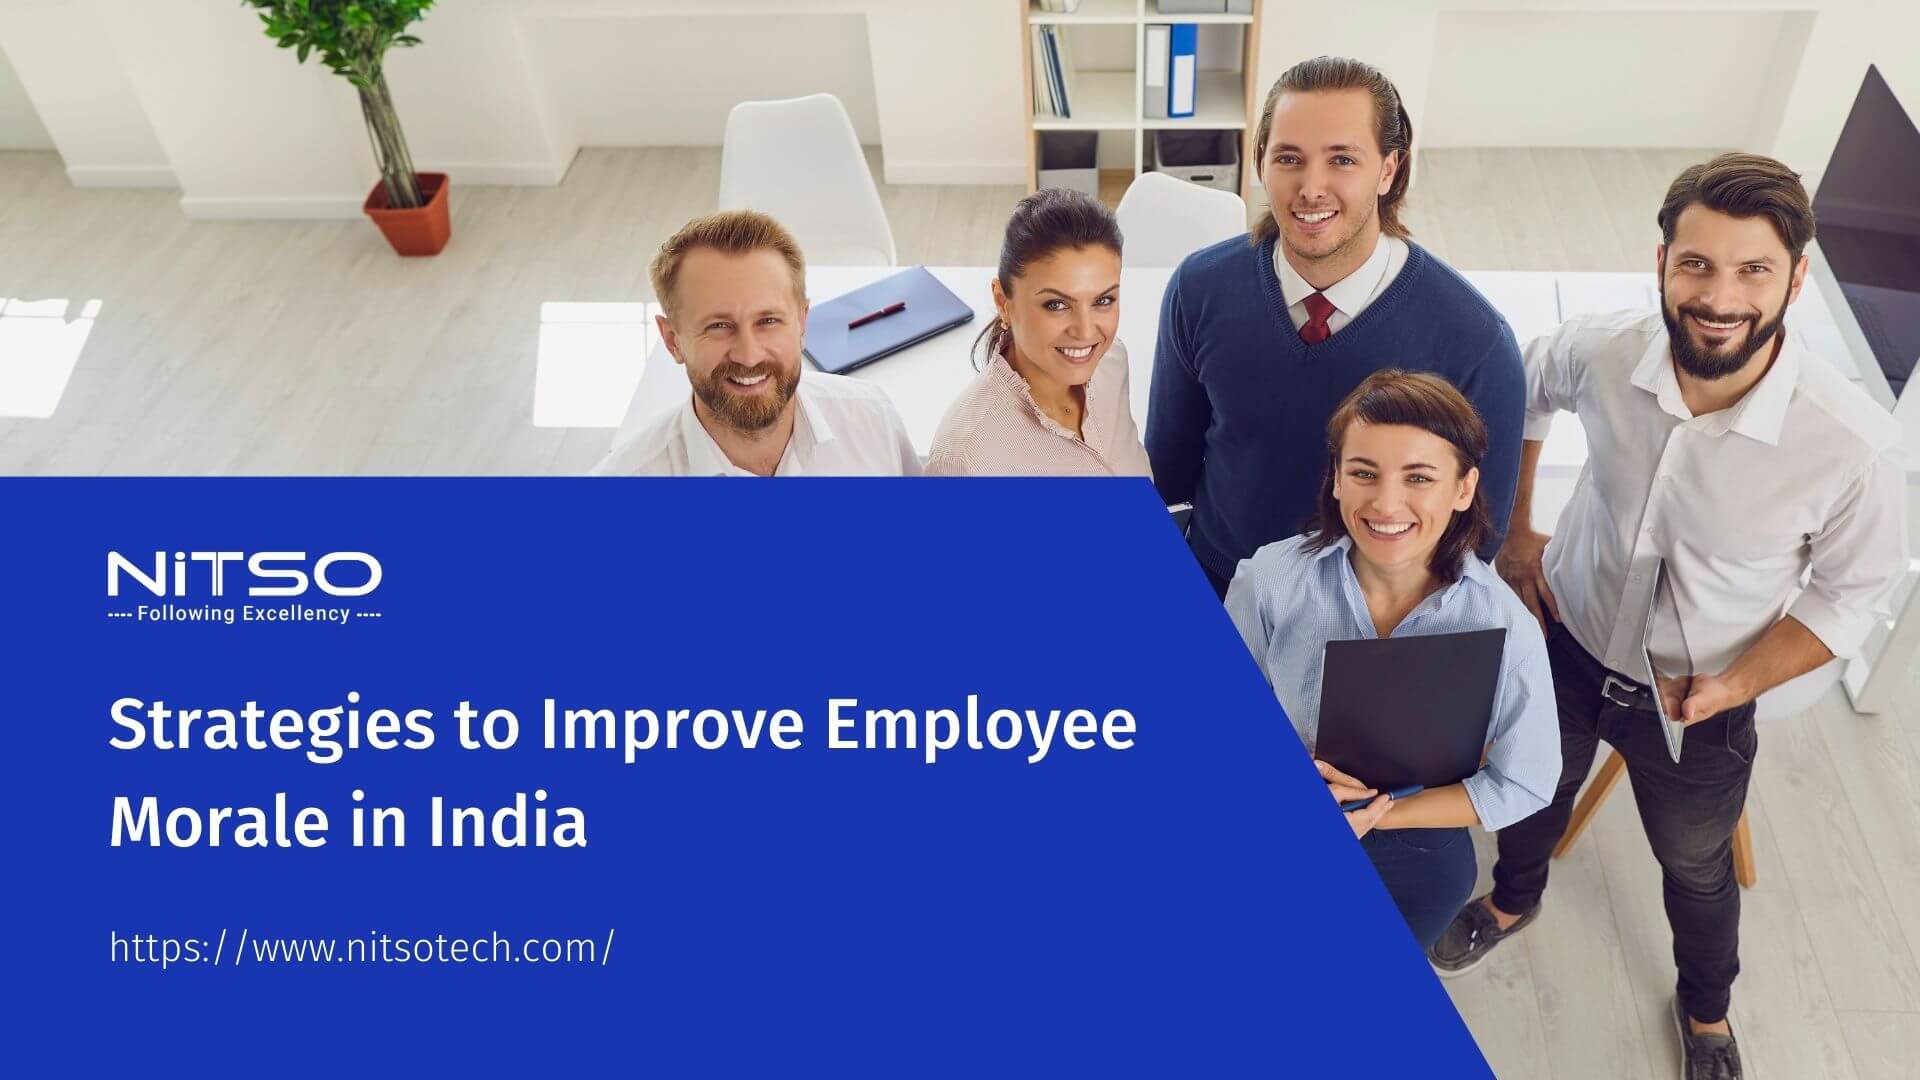 Strategies to Improve Employee Morale in India